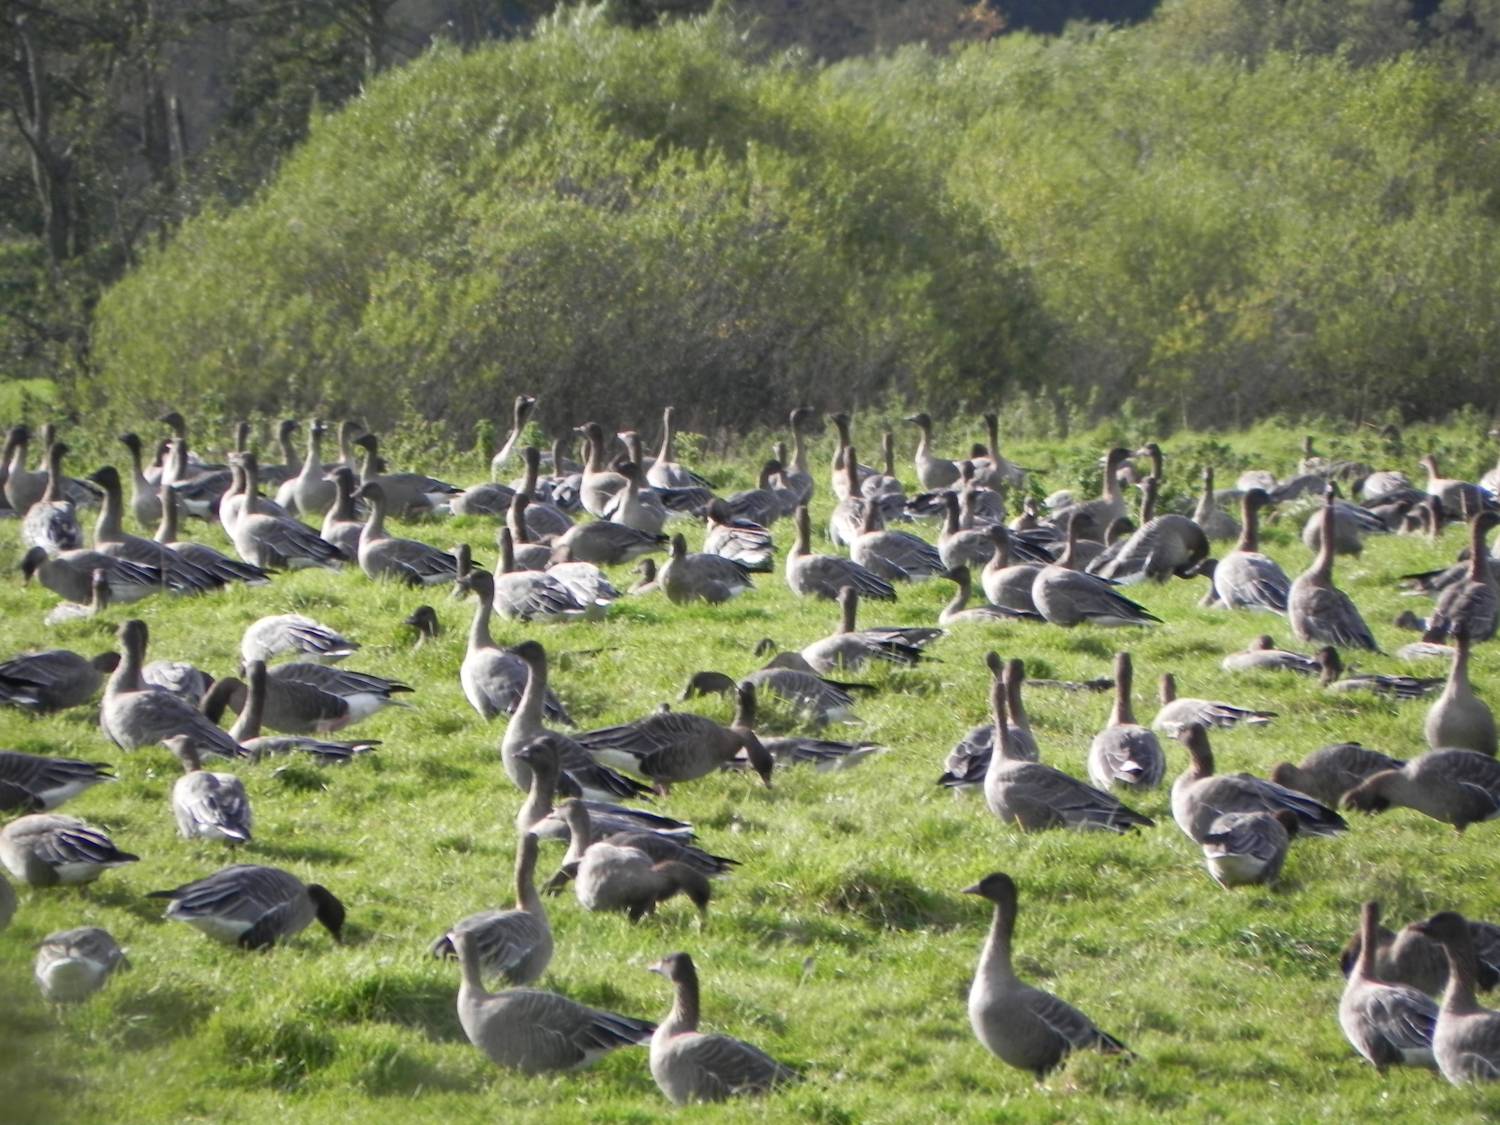 The geese arrive